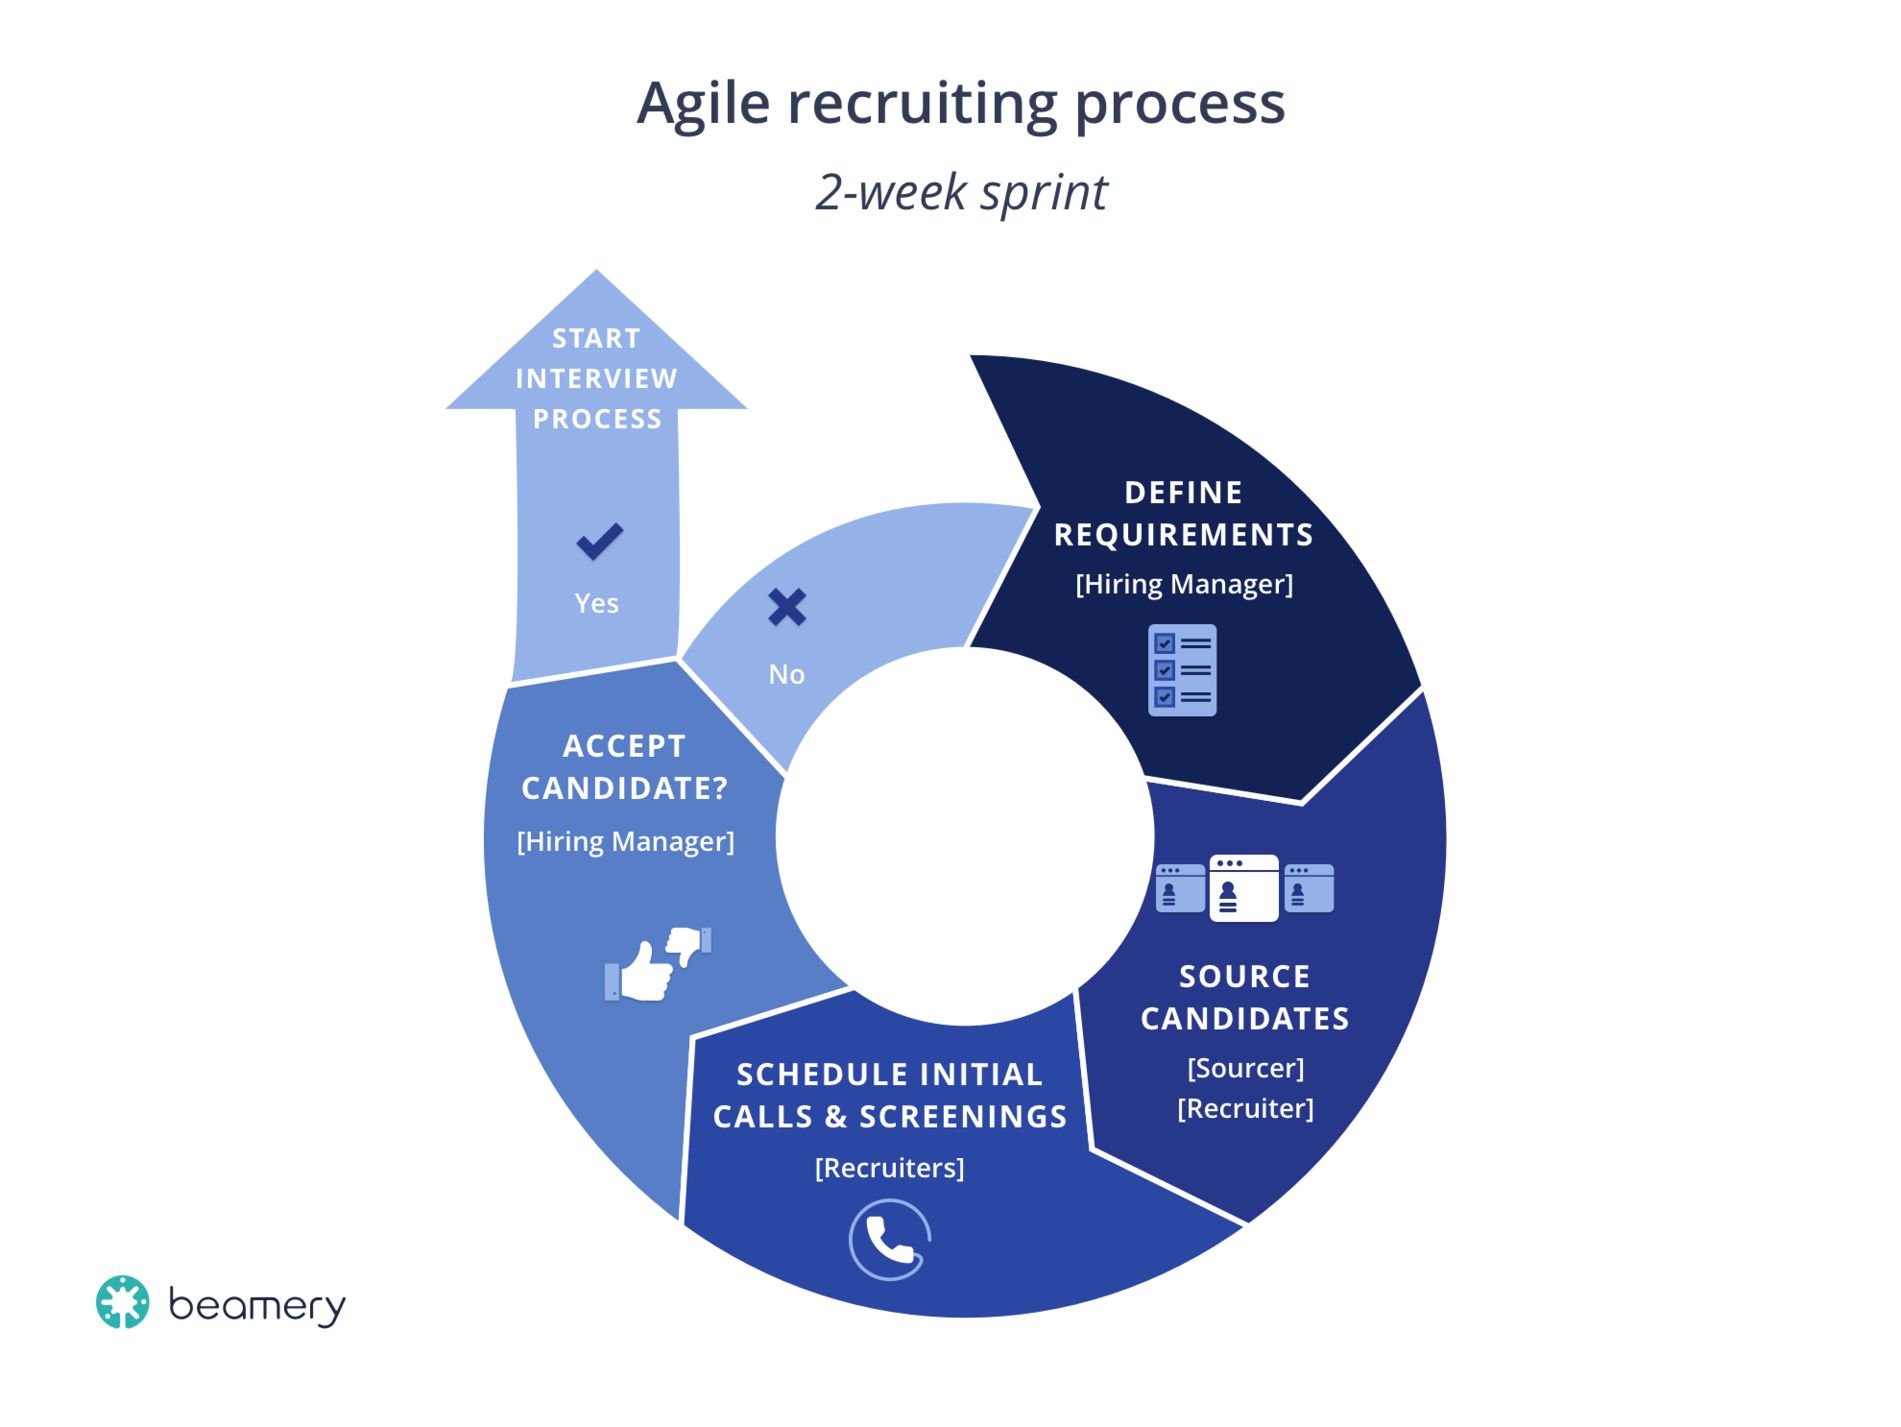 A framework for agile recruiting implementation